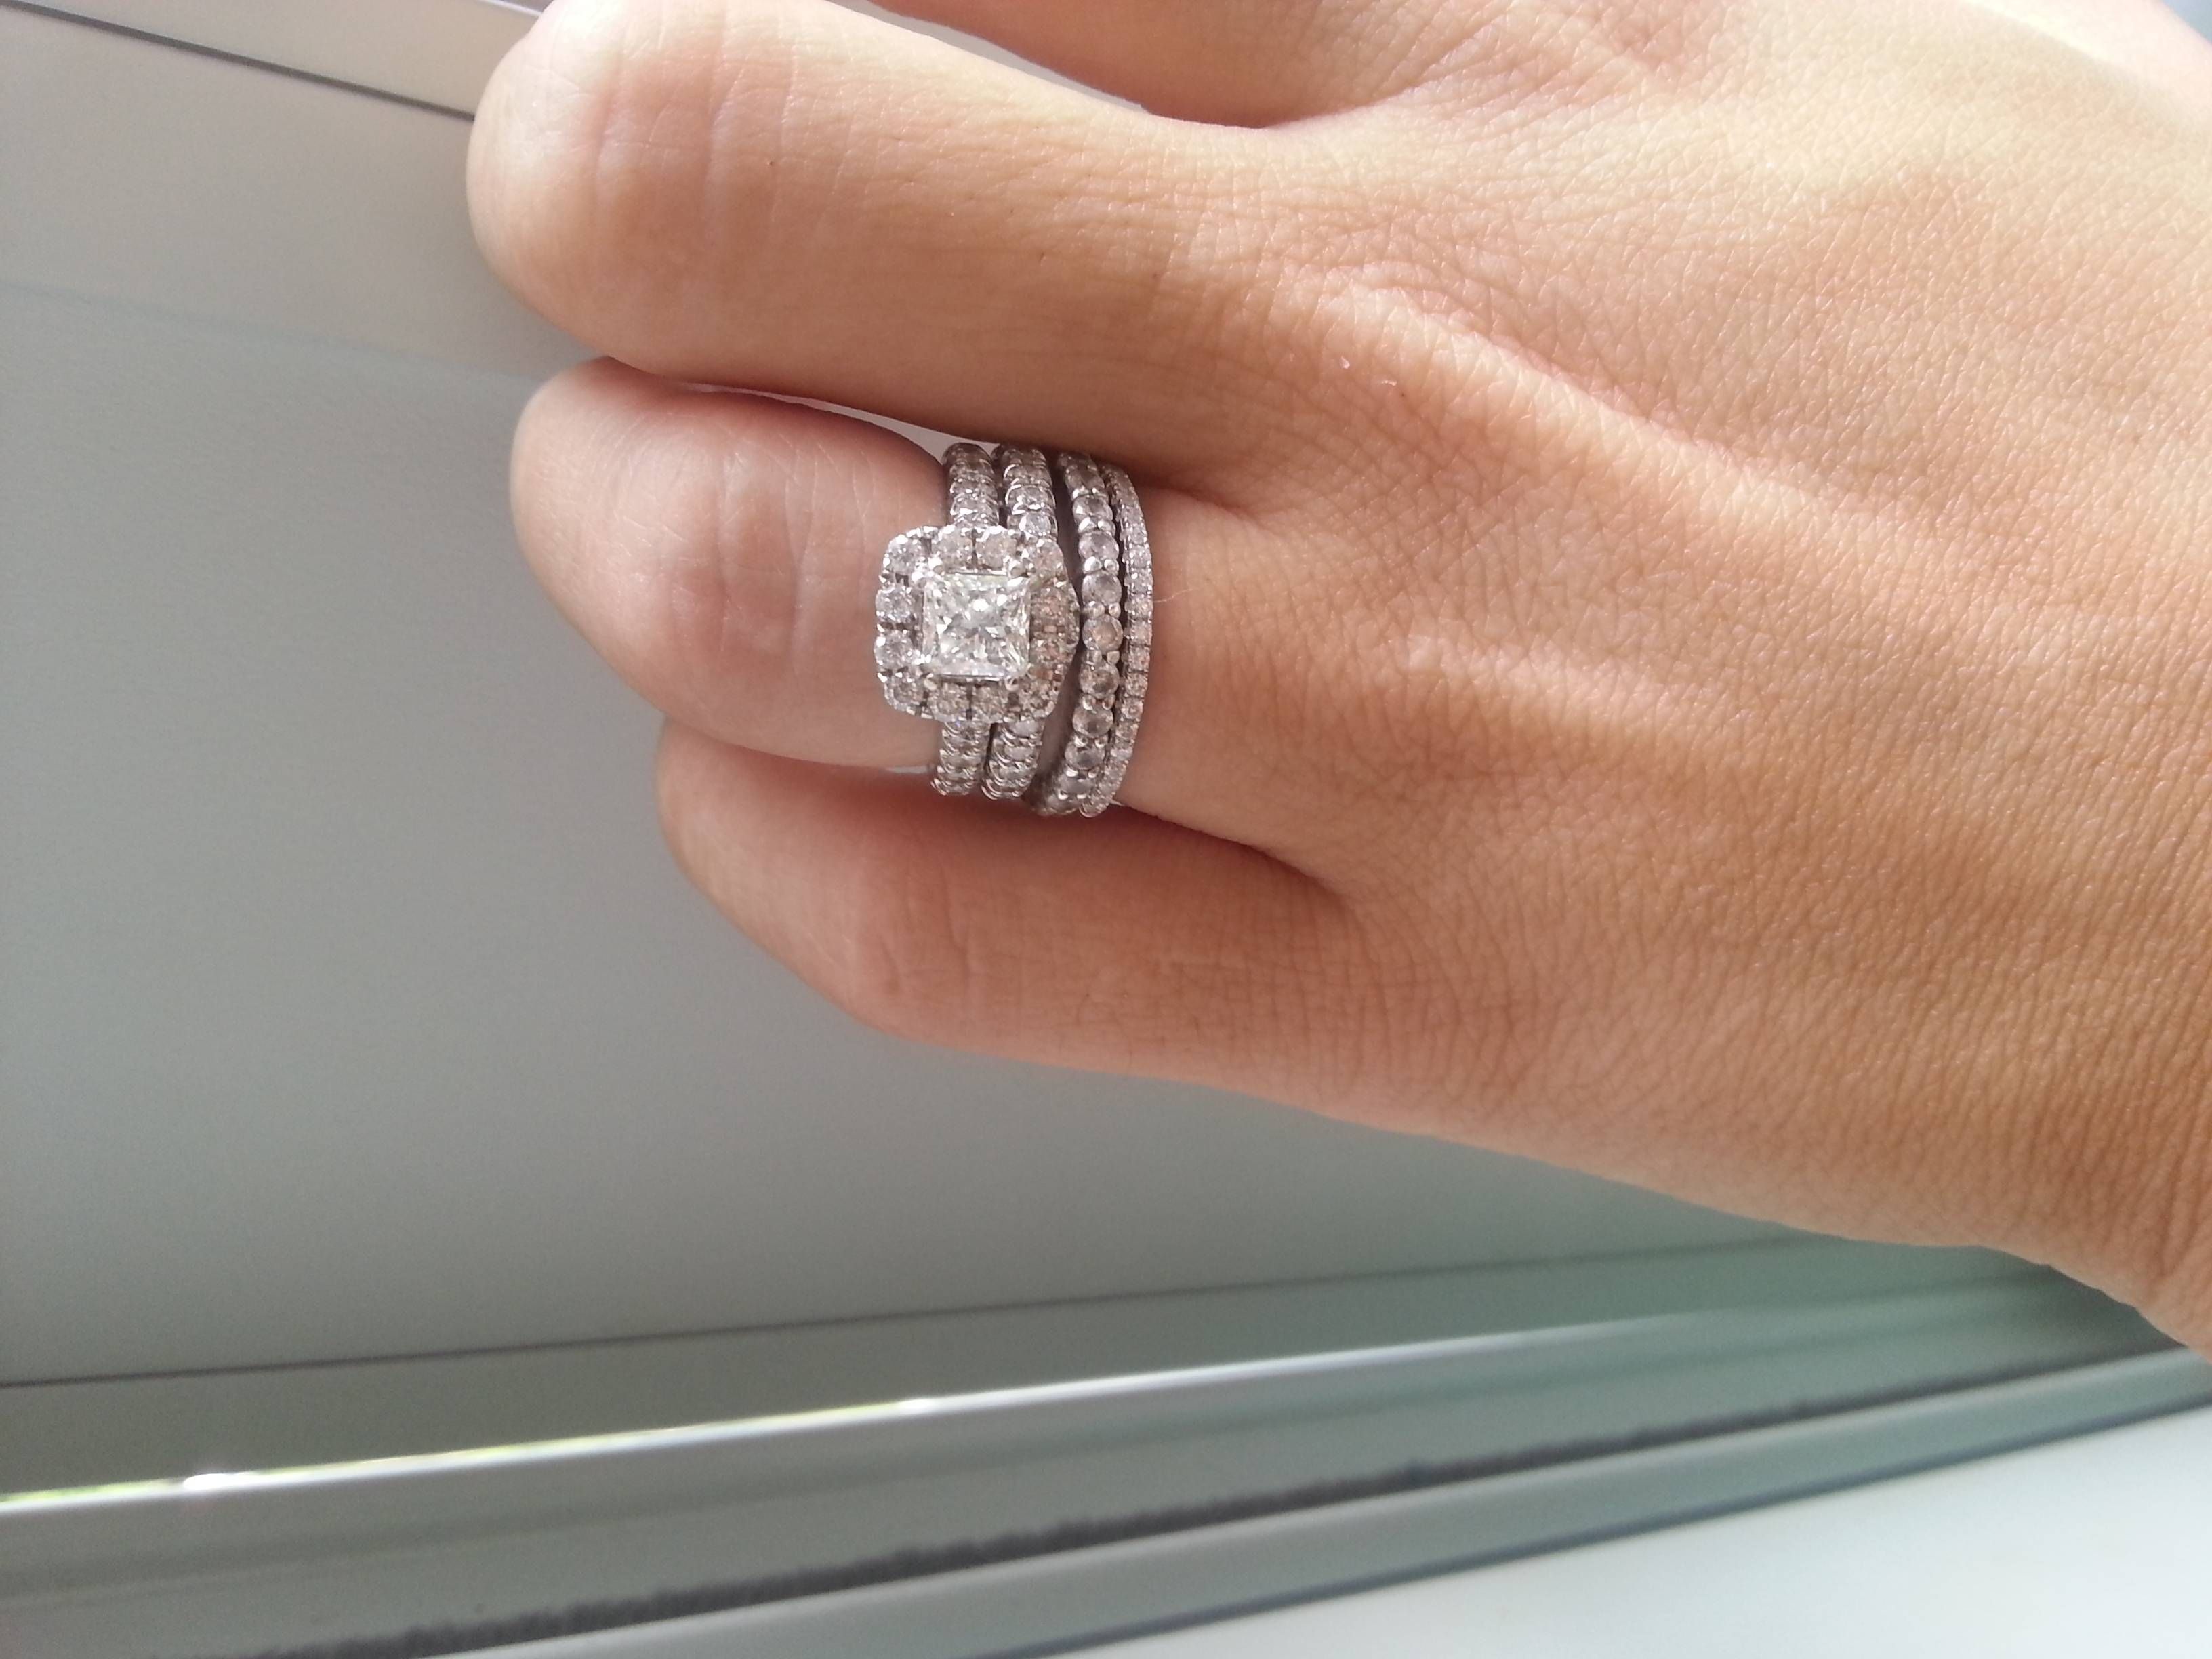 Does Anyone Wear Multiple Wedding Bands? Show Me!! – Weddingbee Inside Multiple Wedding Bands (View 12 of 15)